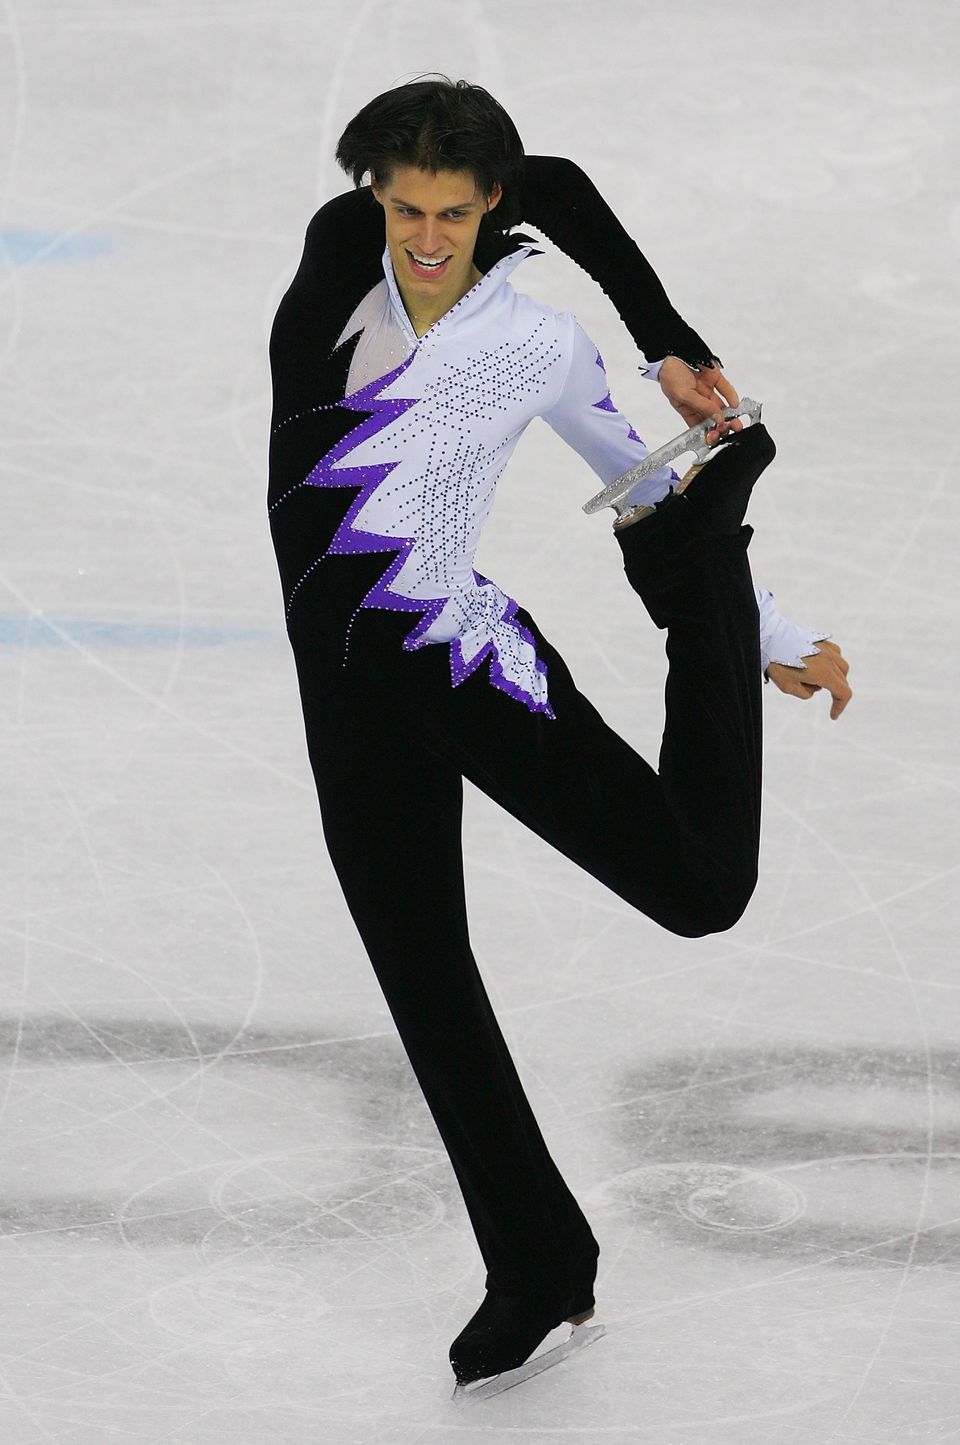 The Epic Evolution Of Men's Figure Skating Costumes Through The Years |  HuffPost Life